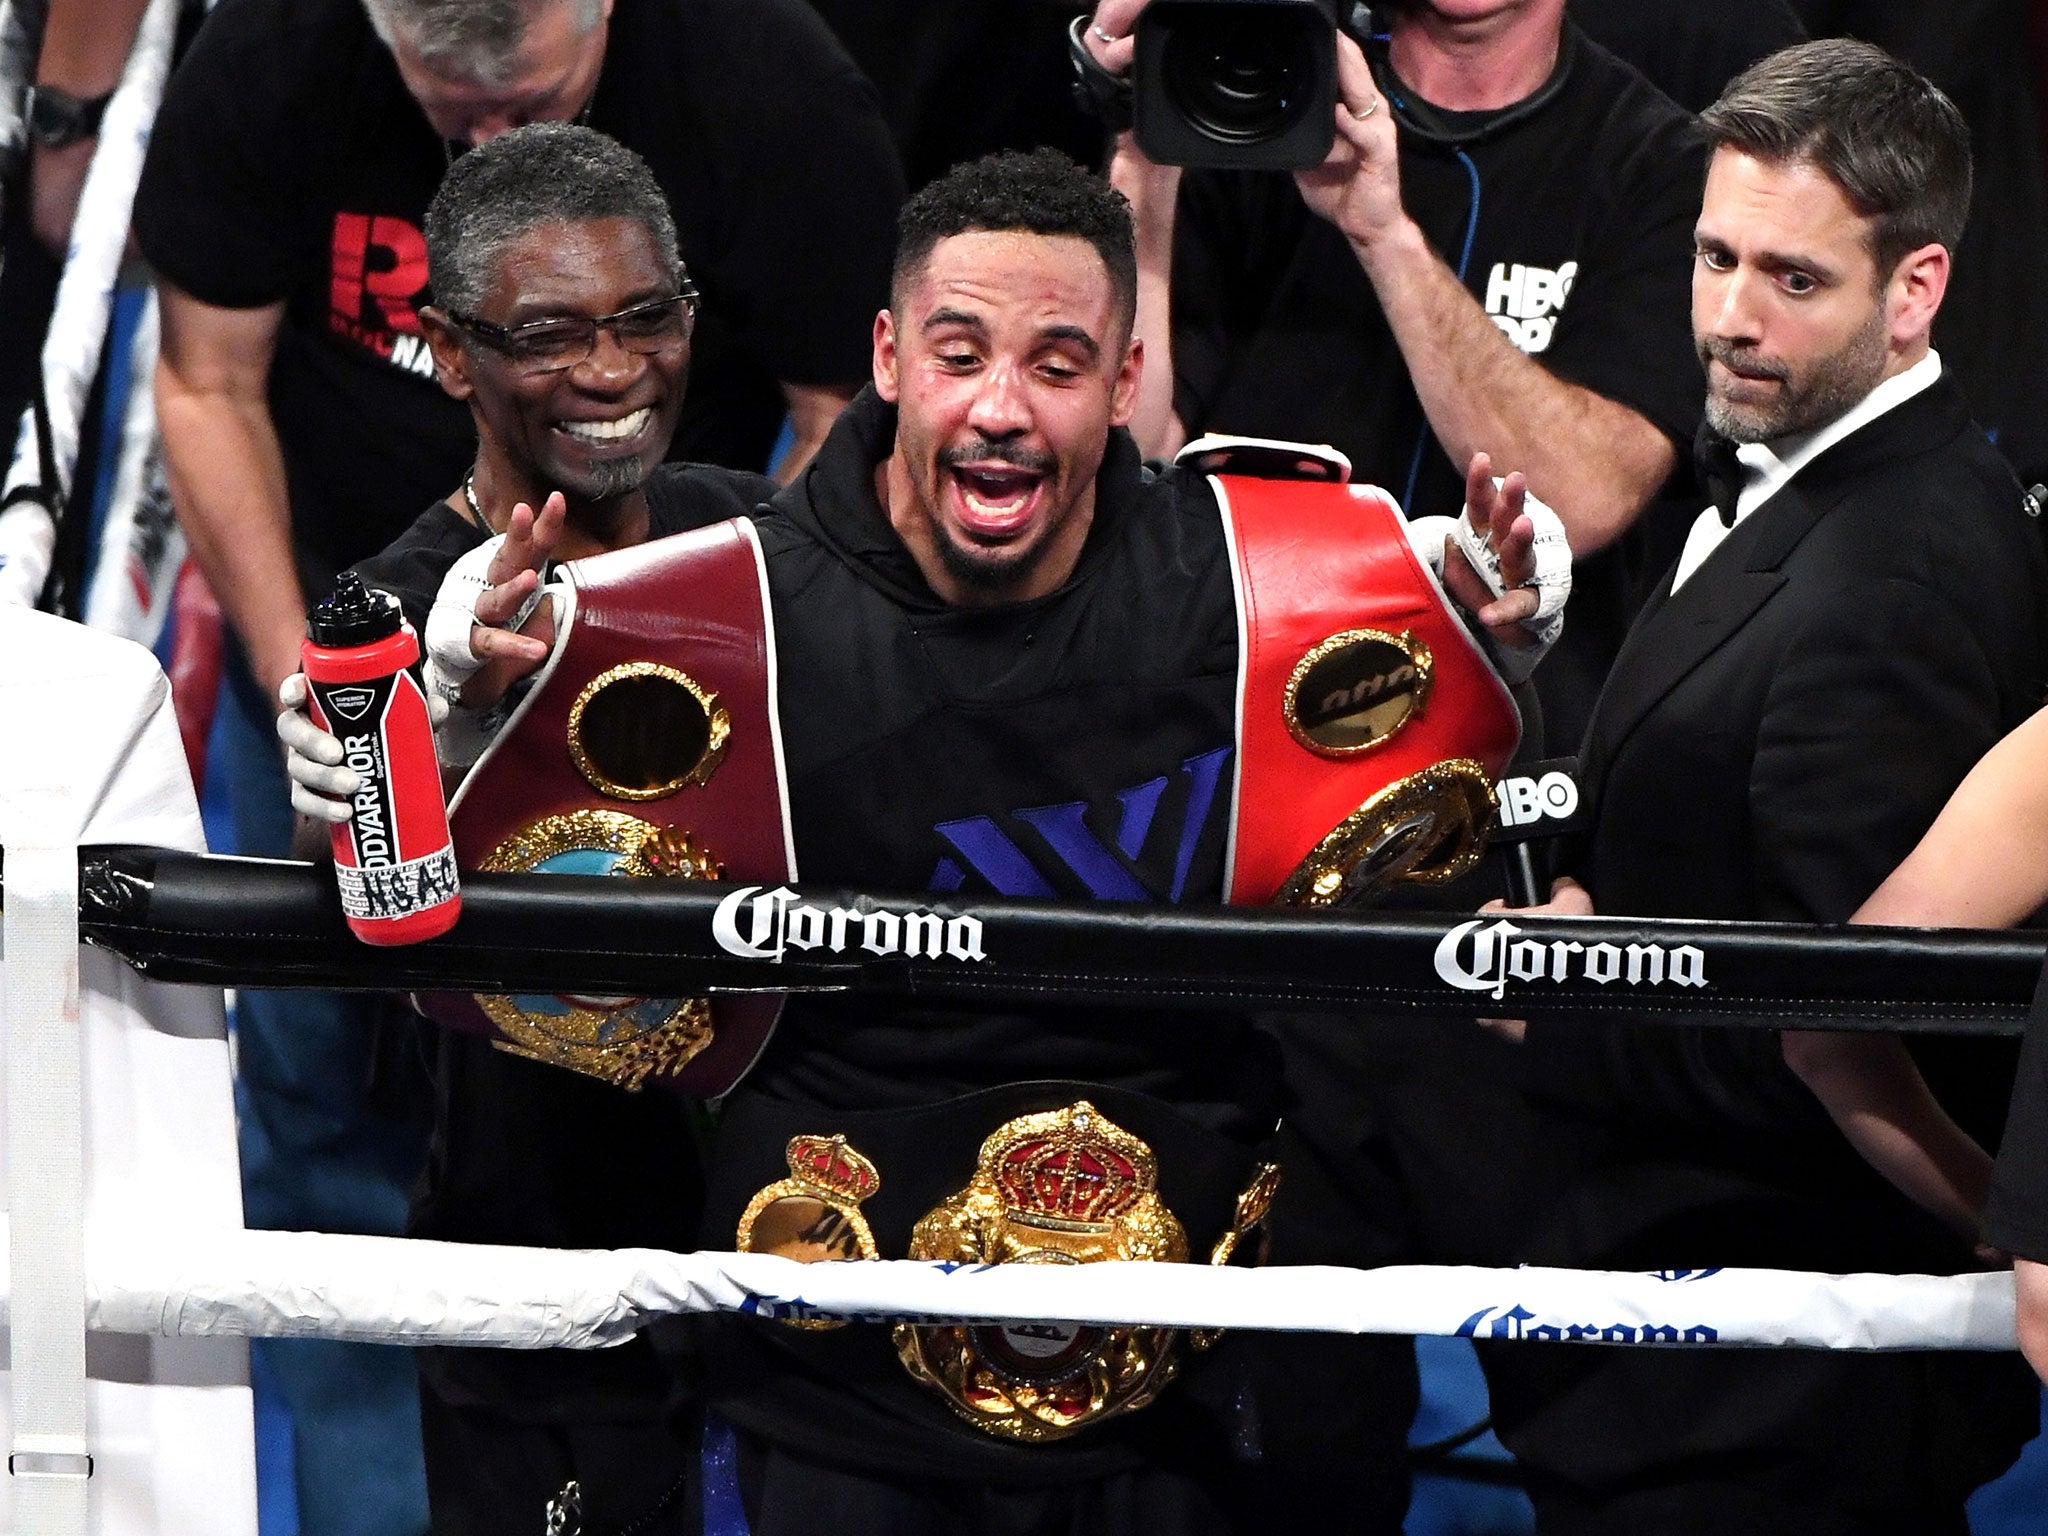 Ward celebrates his victory after being handed the title